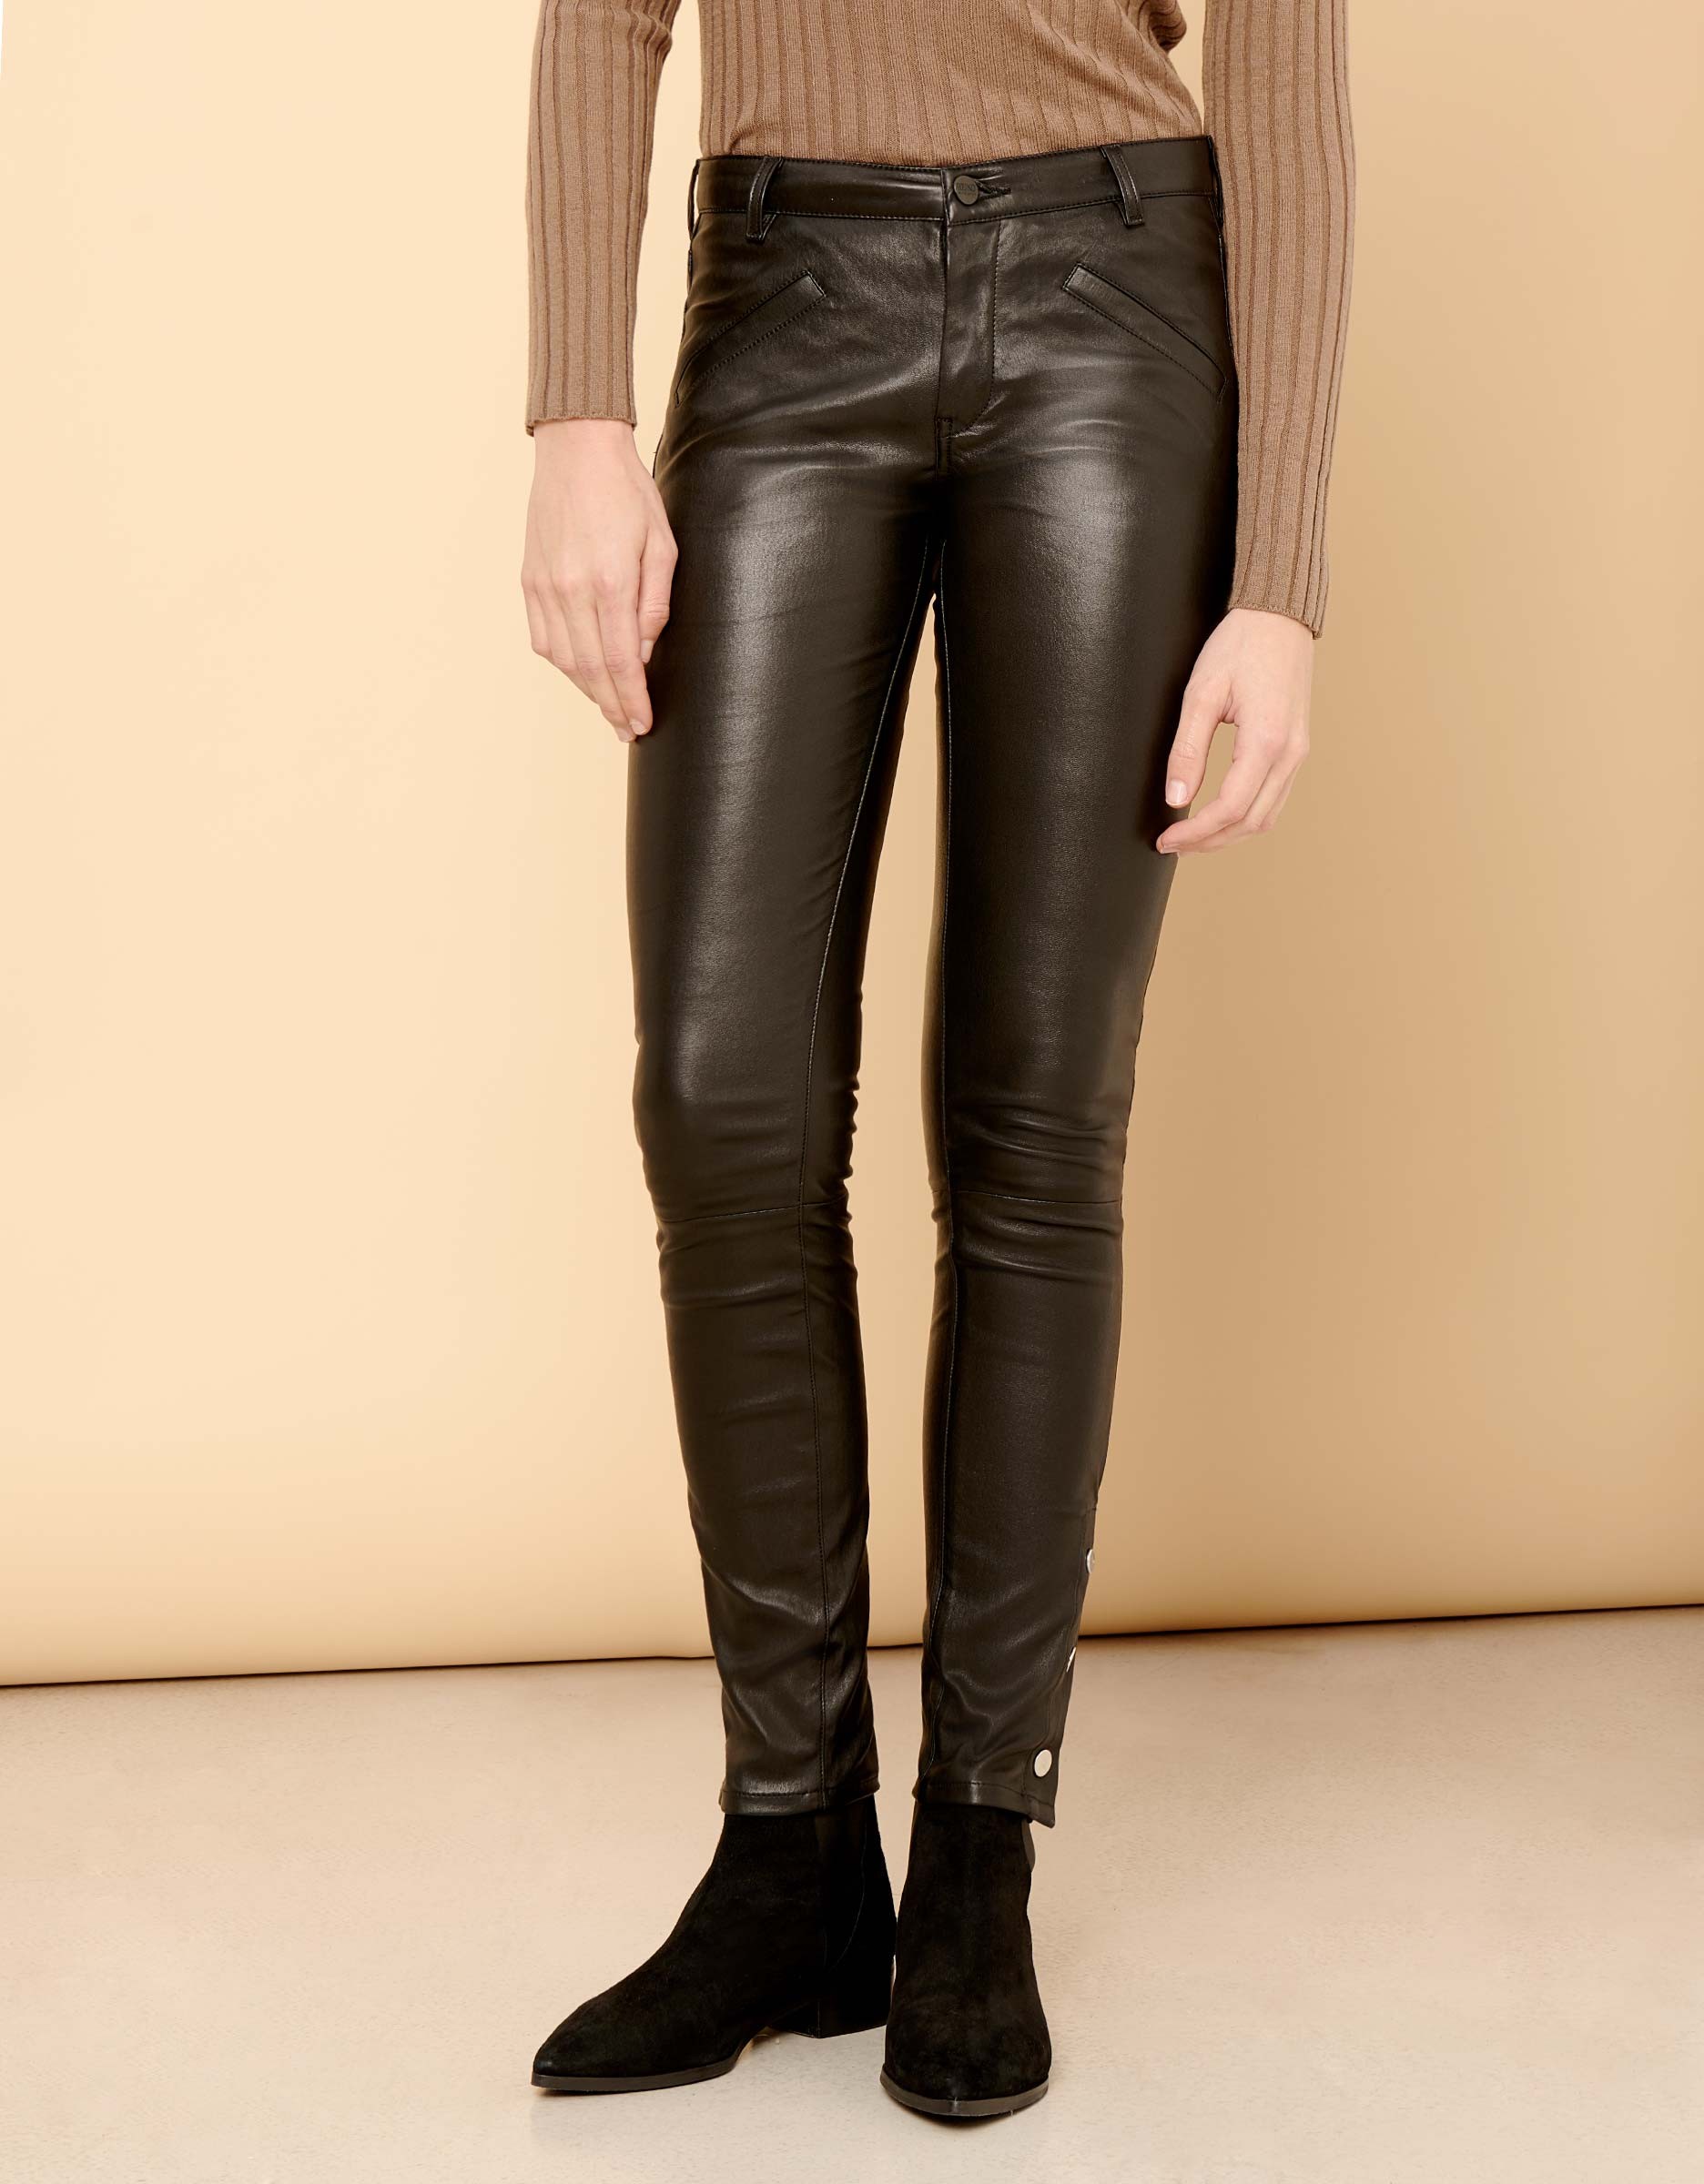 leather trousers black